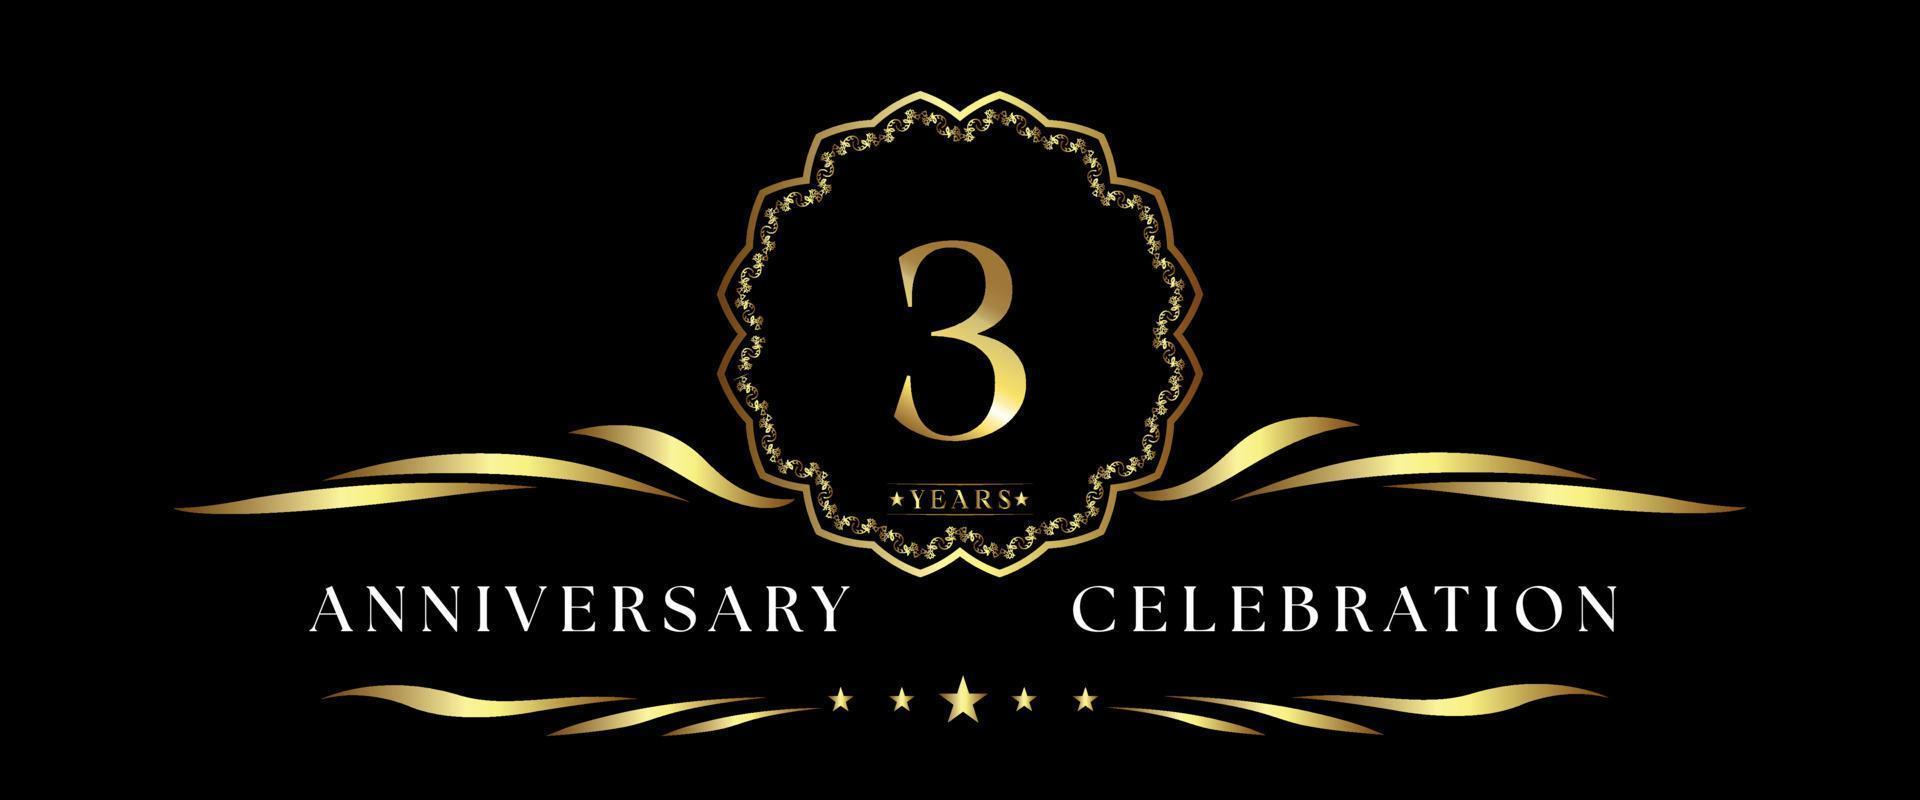 3 years anniversary celebration with gold decorative frame isolated on black background. Vector design for greeting card, birthday party, wedding, event party, ceremony. 3 years Anniversary logo.